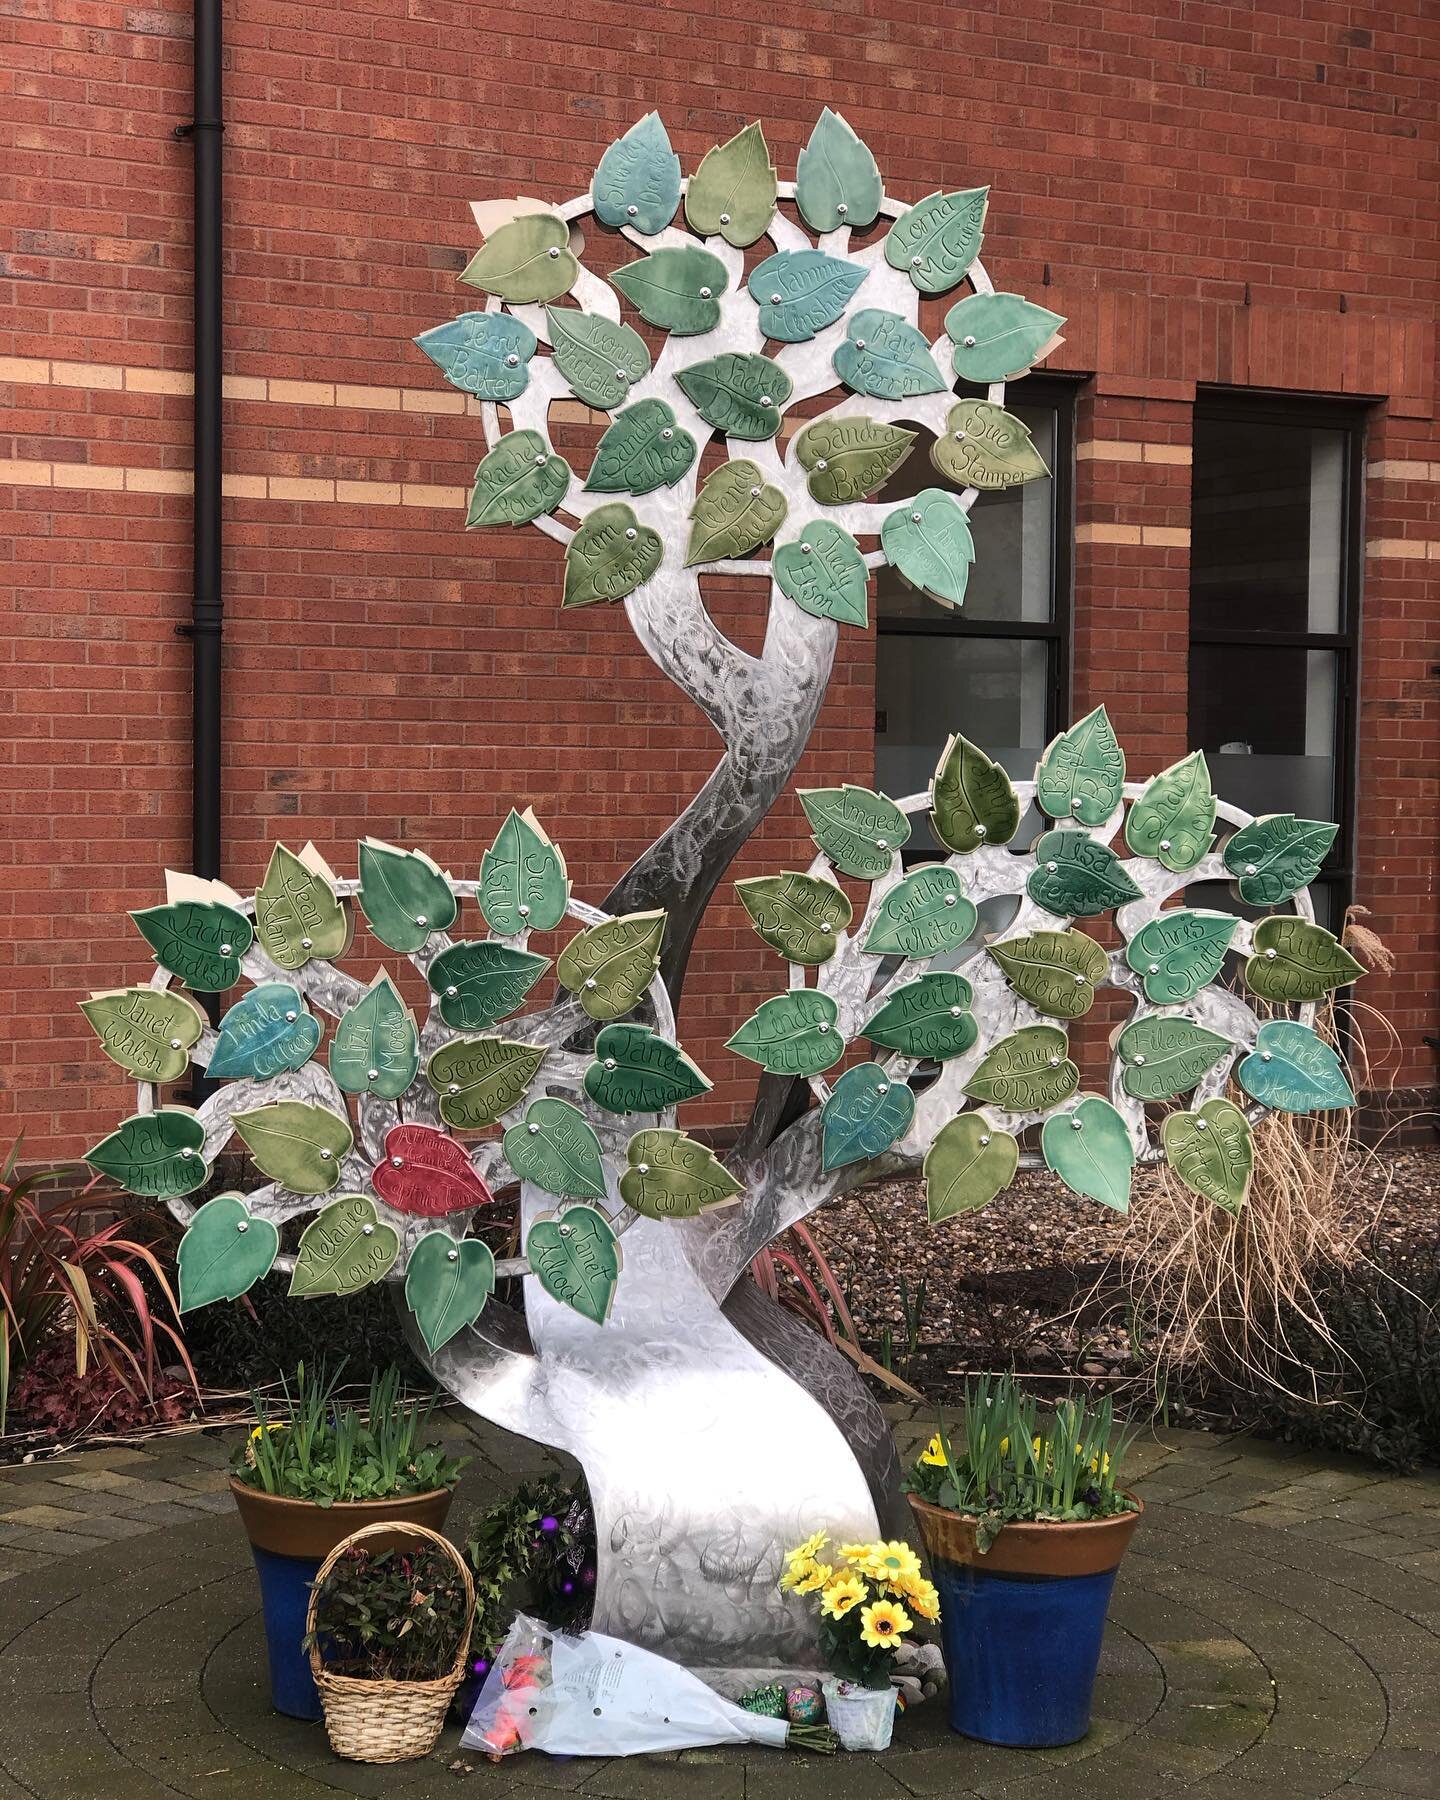 Took a little trip up to the Queens Hospital in Burton today, to install a few more of the hand carved ceramic remembrance leaves for the Memorial Tree Sculpture. 
.
Designed and Created by myself in 2019, this stainless steel and ceramic sculpture w